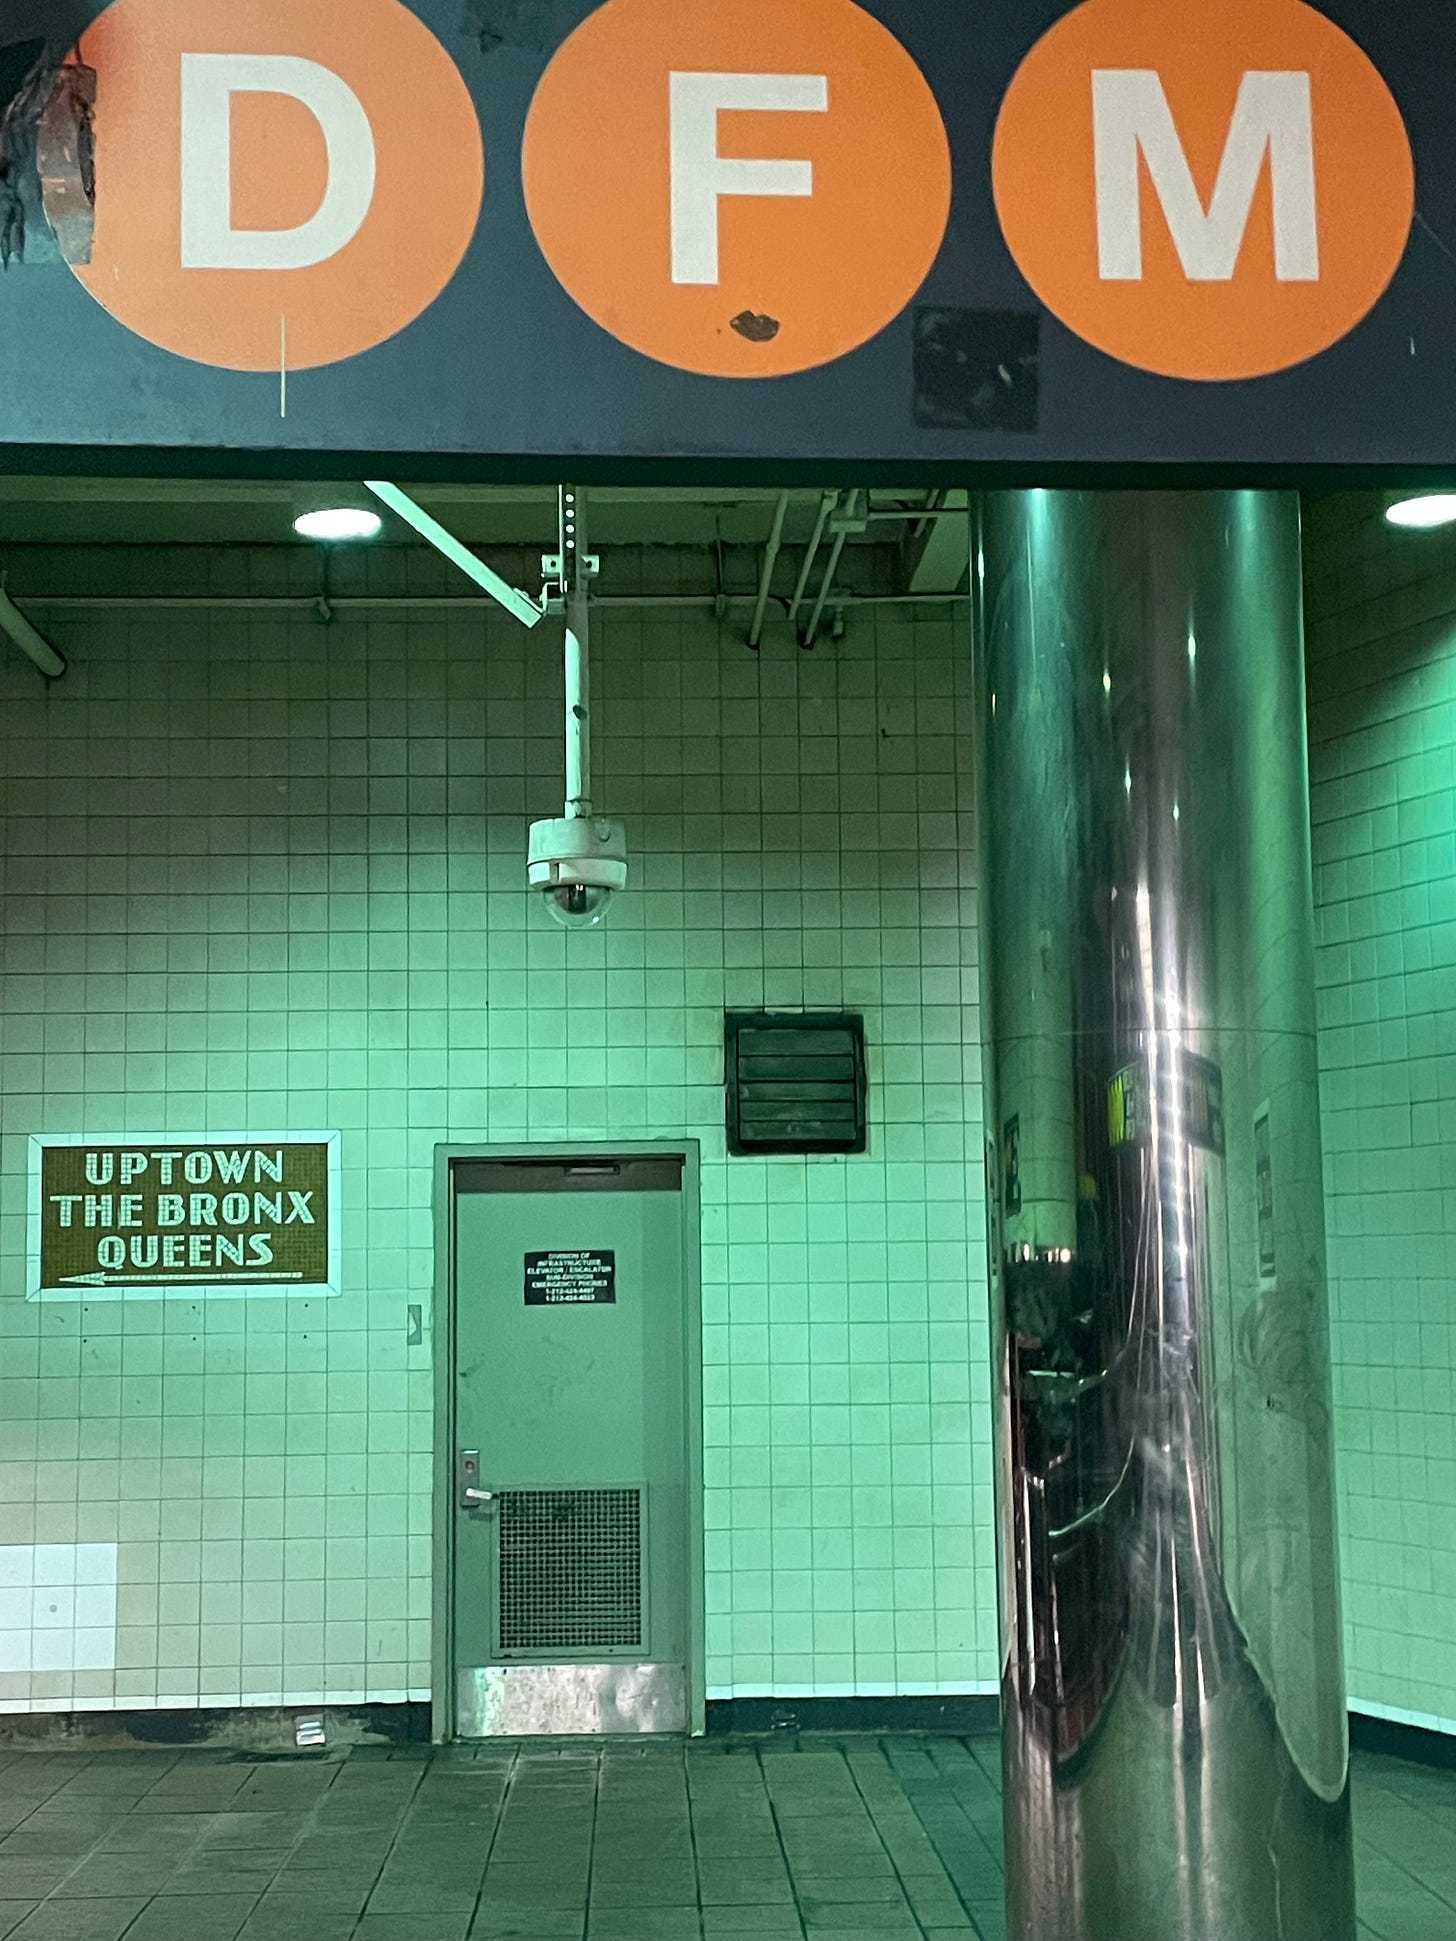 A photo of an MTA security camera inside 34th Street/Herald Square subway station.